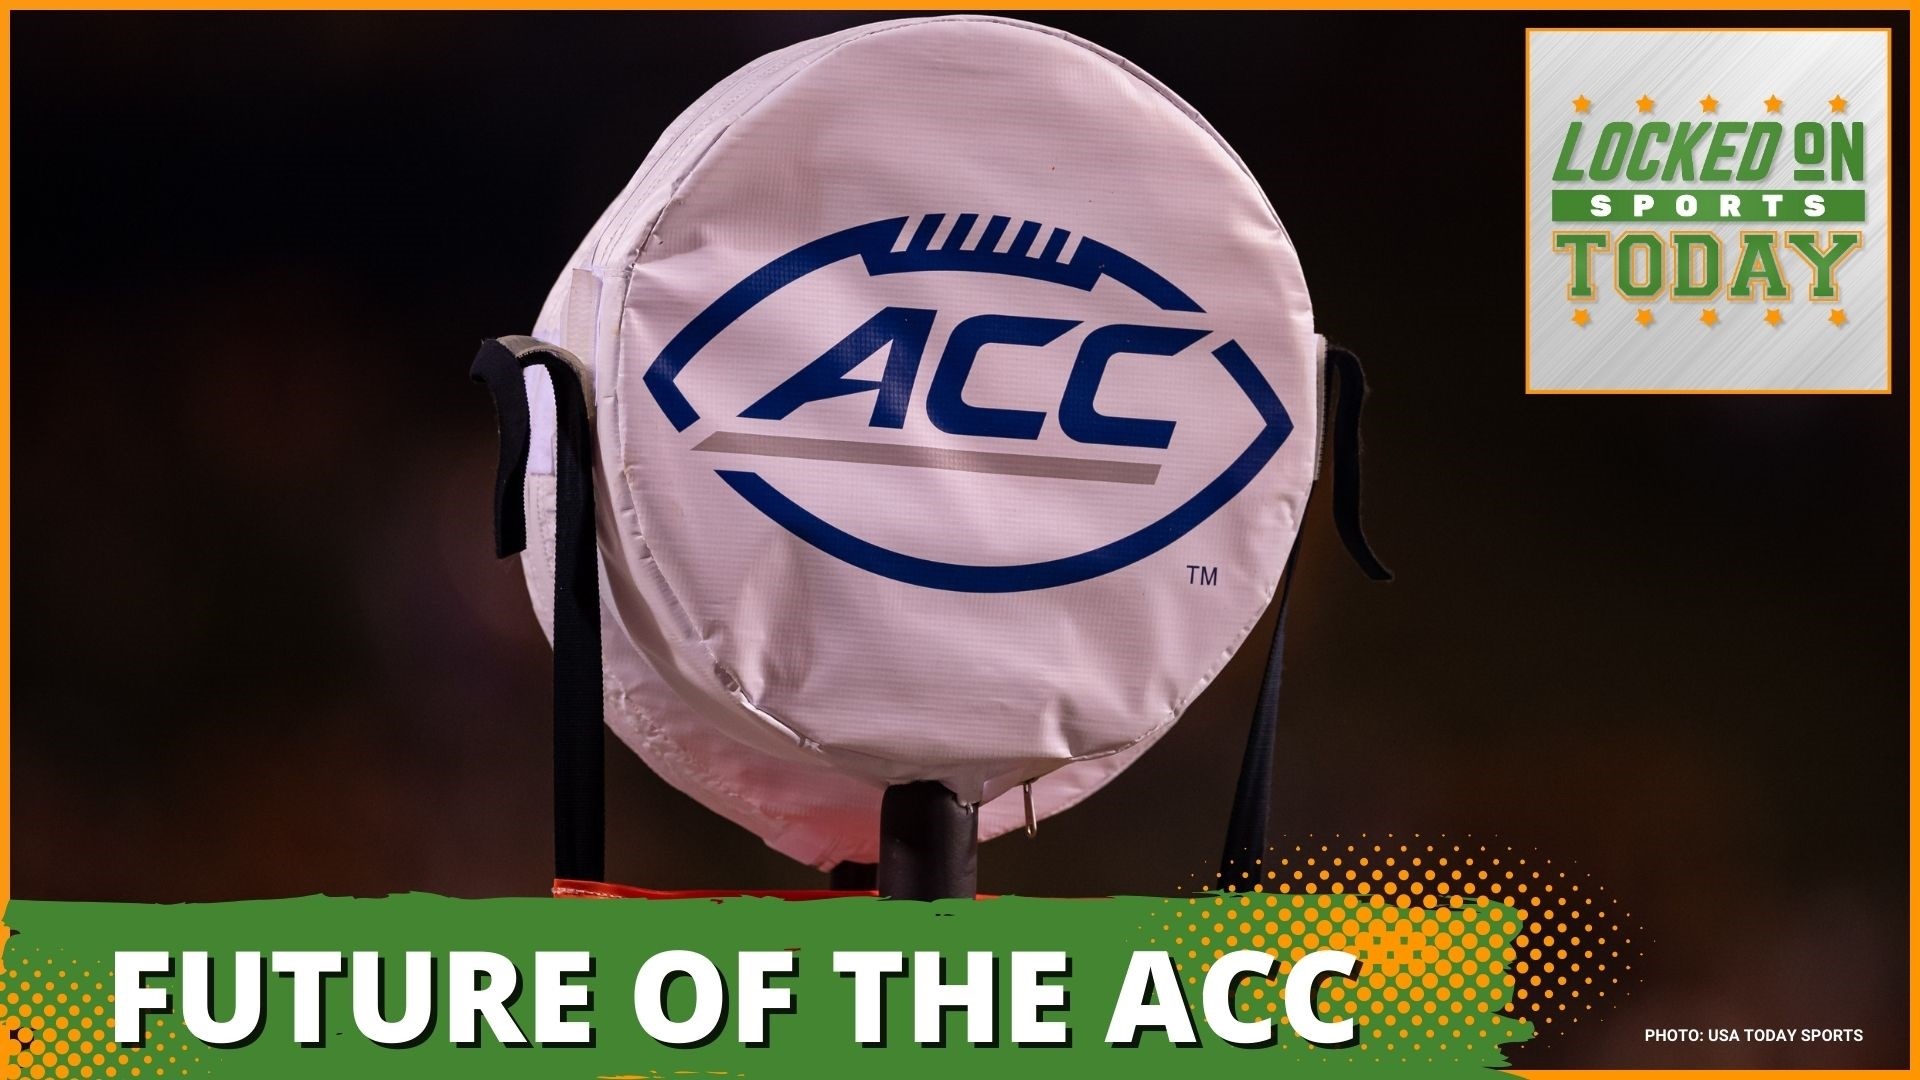 Discussing the day's top sports stories from the future of the ACC to Alvin Kamara bracing for suspension and the Alabama, Auburn rivalry continues.